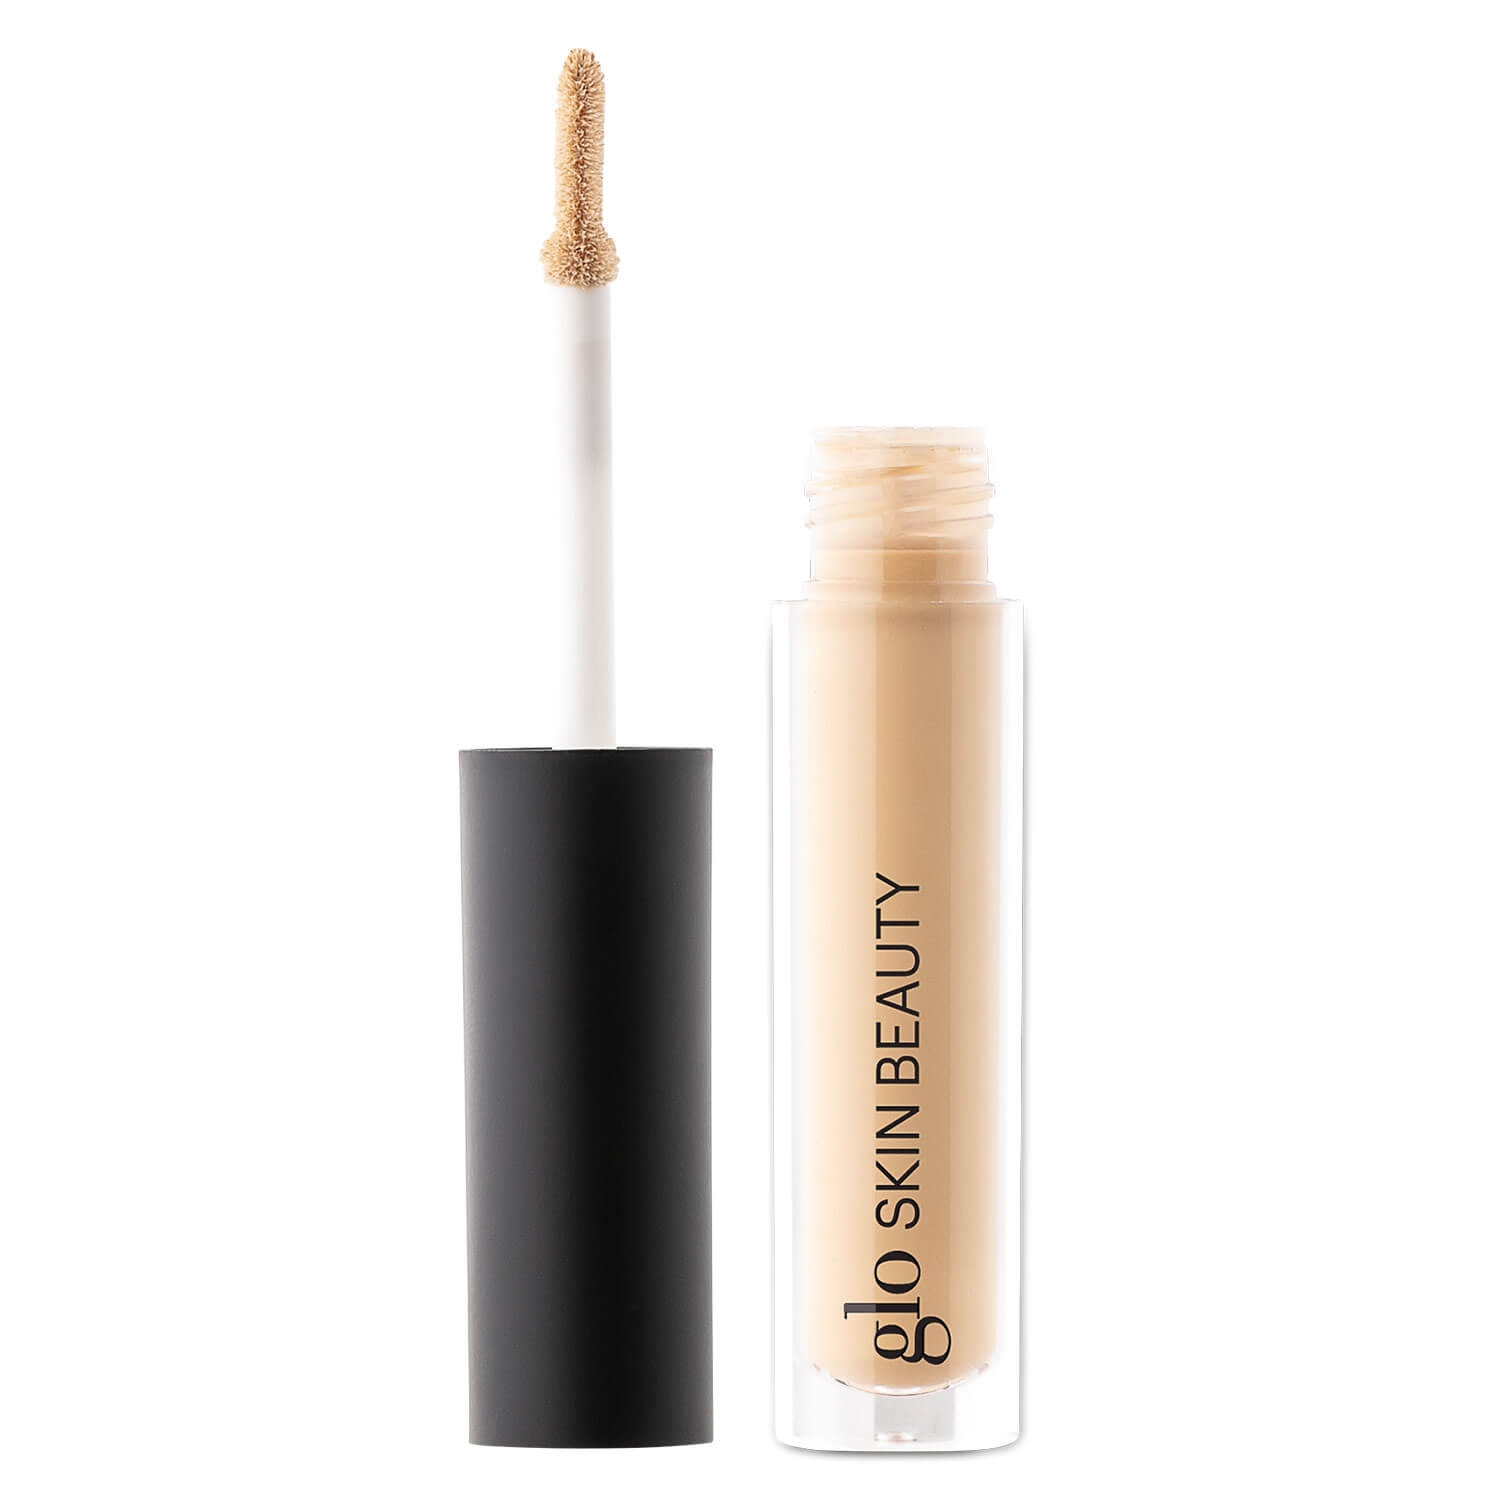 Product image from Glo Skin Beauty Concealer - Liquid Bright Concealer Banana